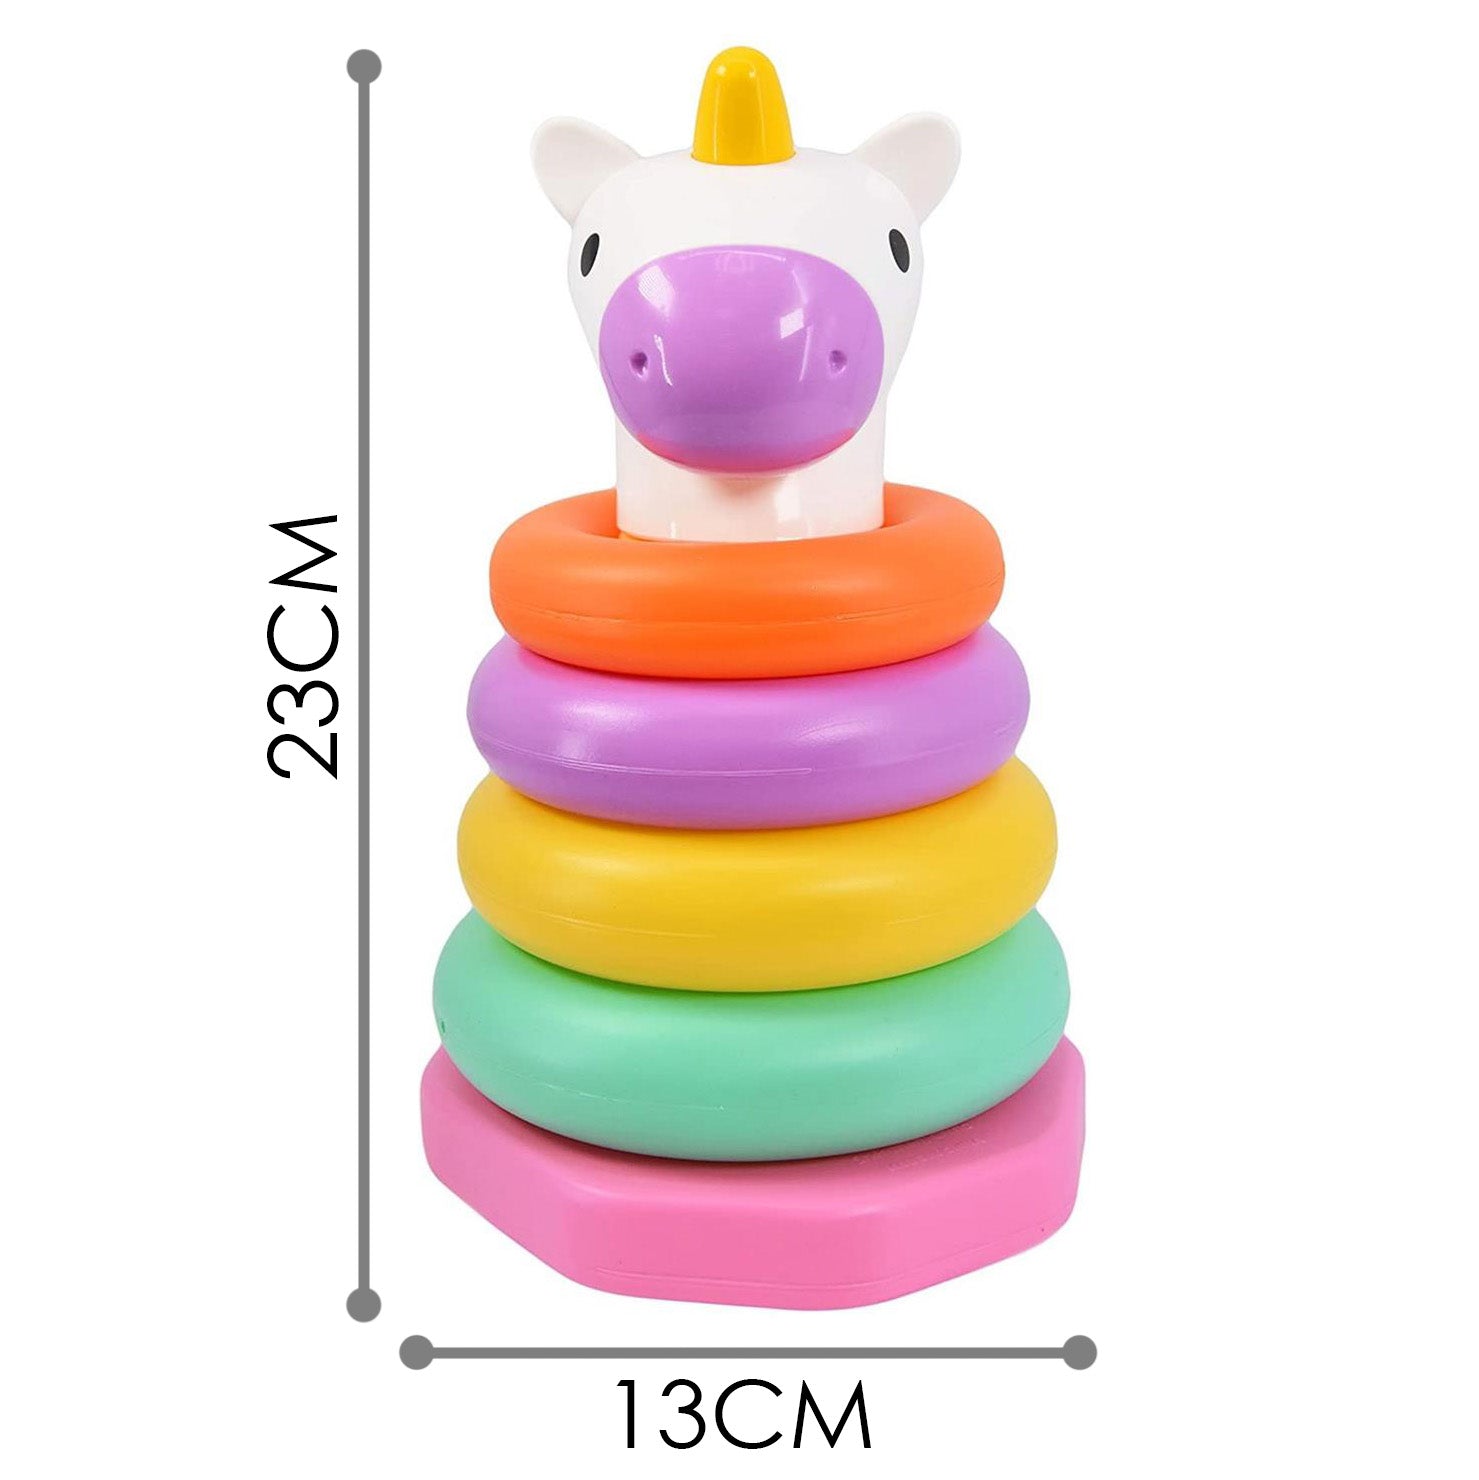 The Magic Toy Shop Stacking Rings "Una The Unicorn" Baby Stacking Rings